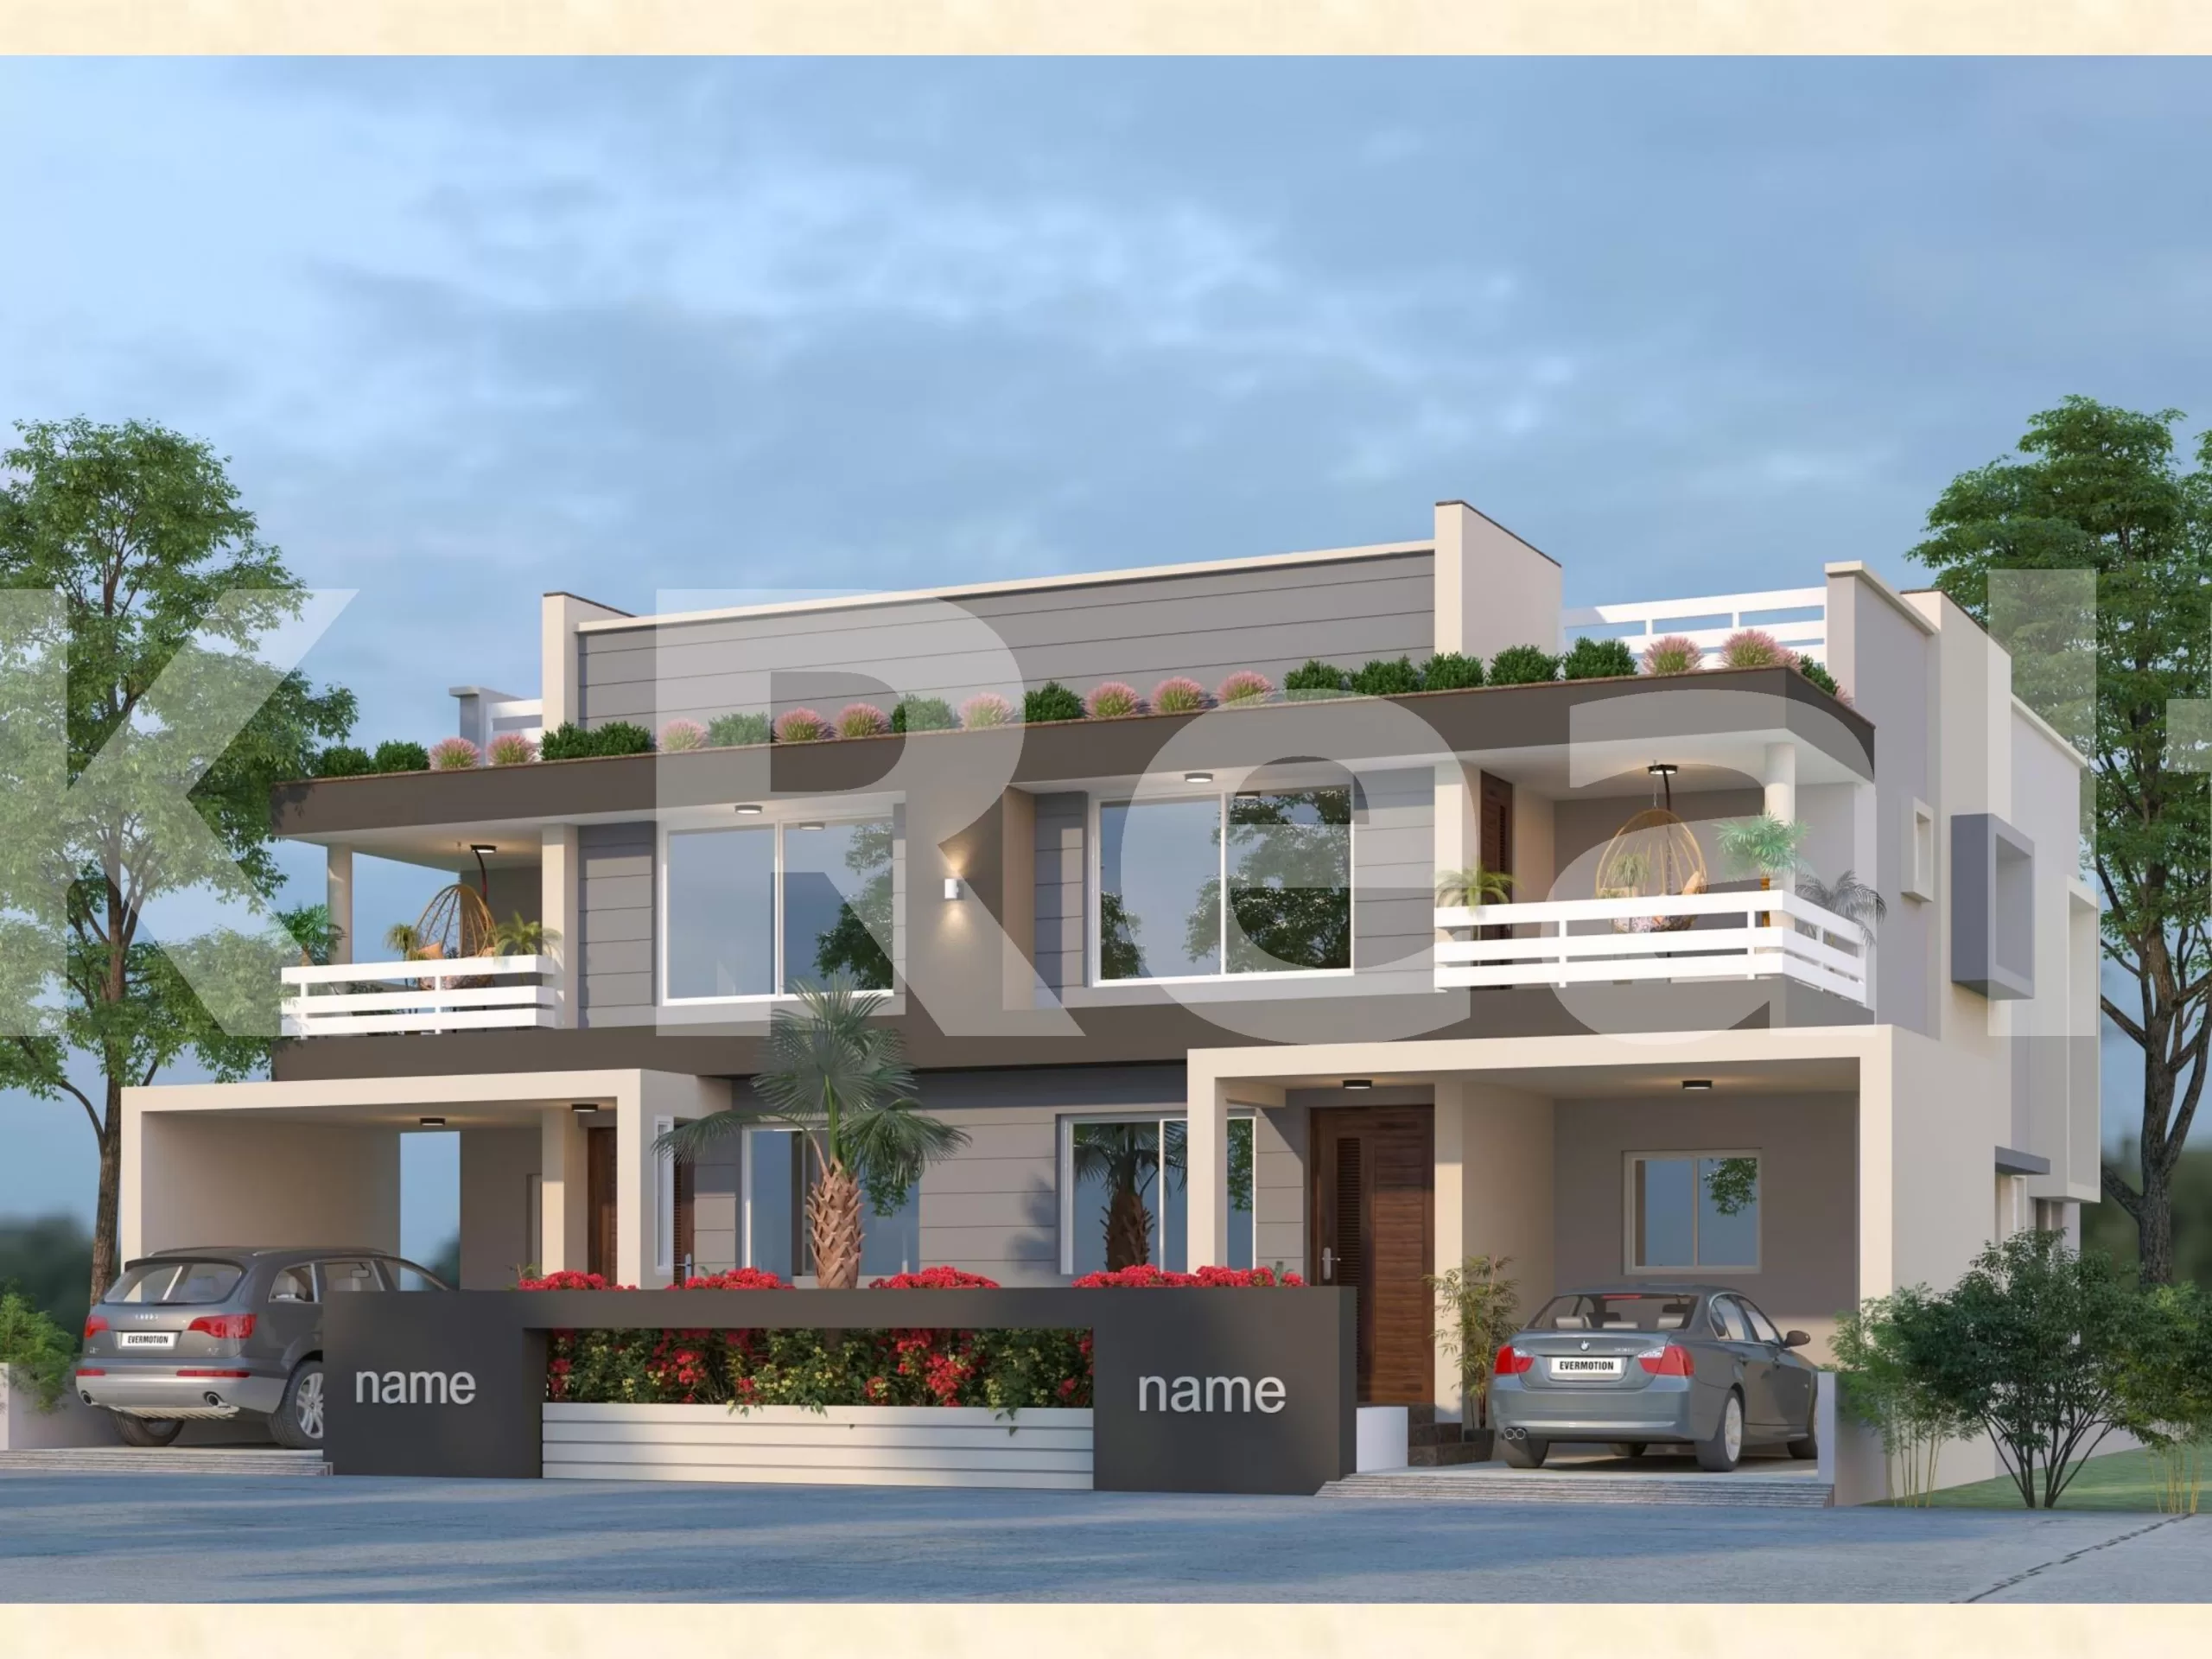 2000 Sq.Ft. 3 BHK Residential Independent House / Villa for Sale in Jogani mata temple – Anand